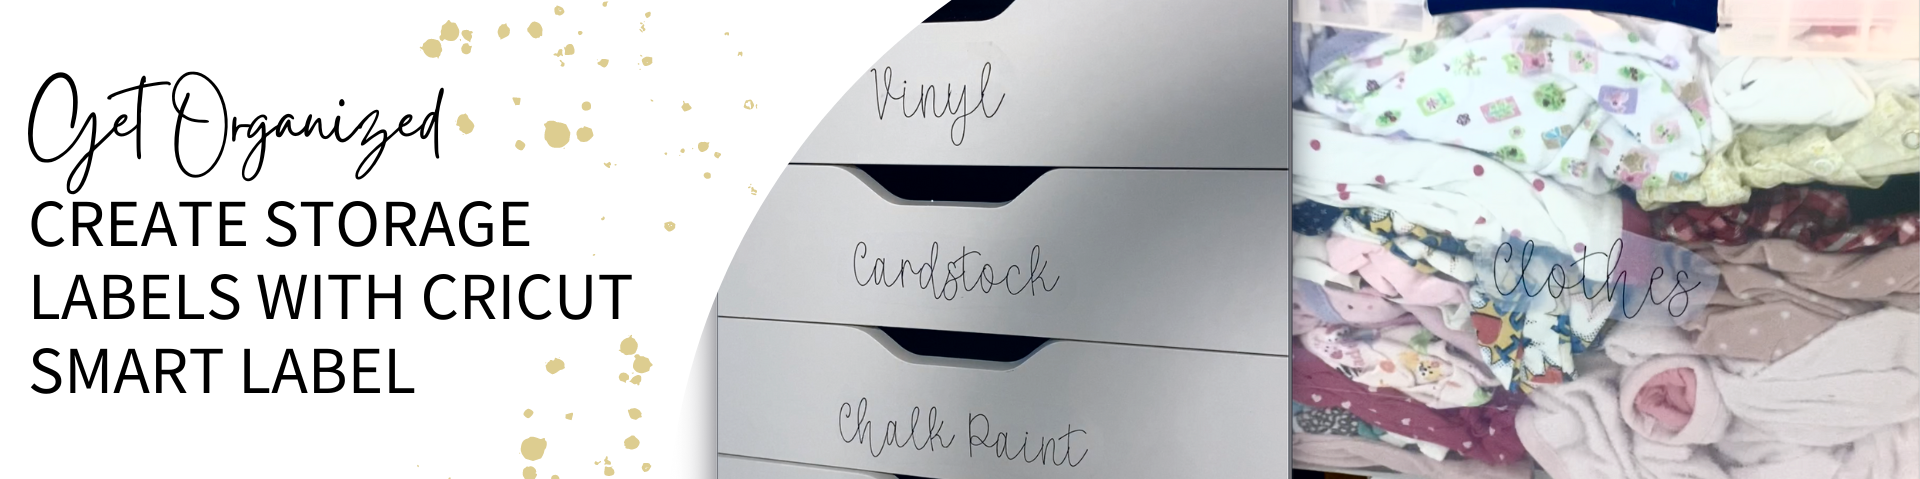 How to Get Organized with Cricut Smart Label